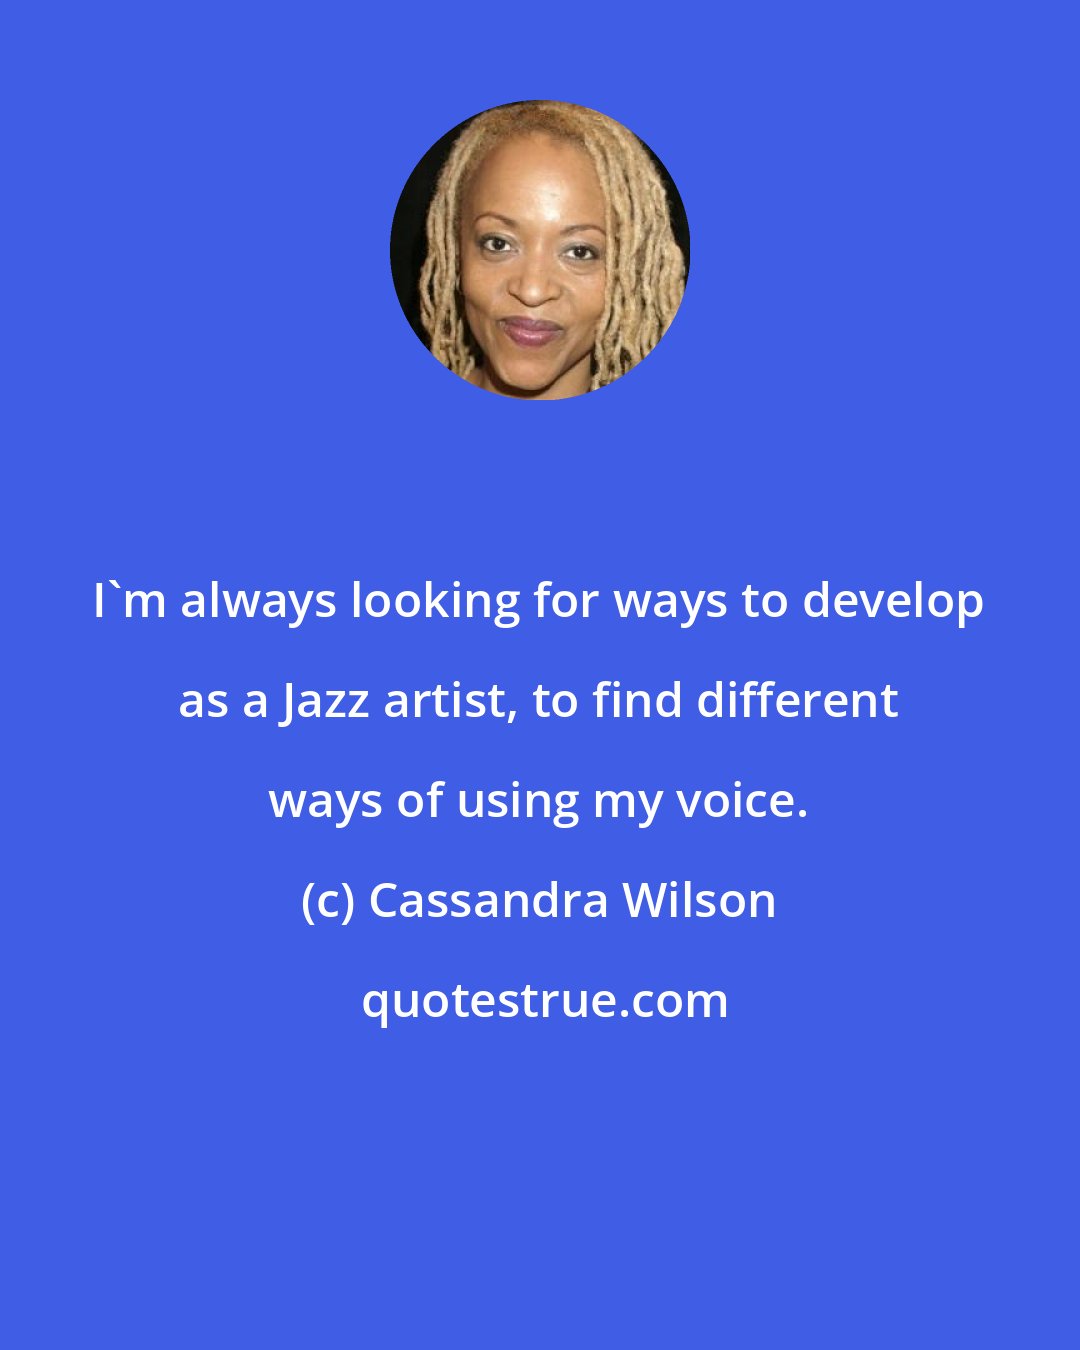 Cassandra Wilson: I'm always looking for ways to develop as a Jazz artist, to find different ways of using my voice.